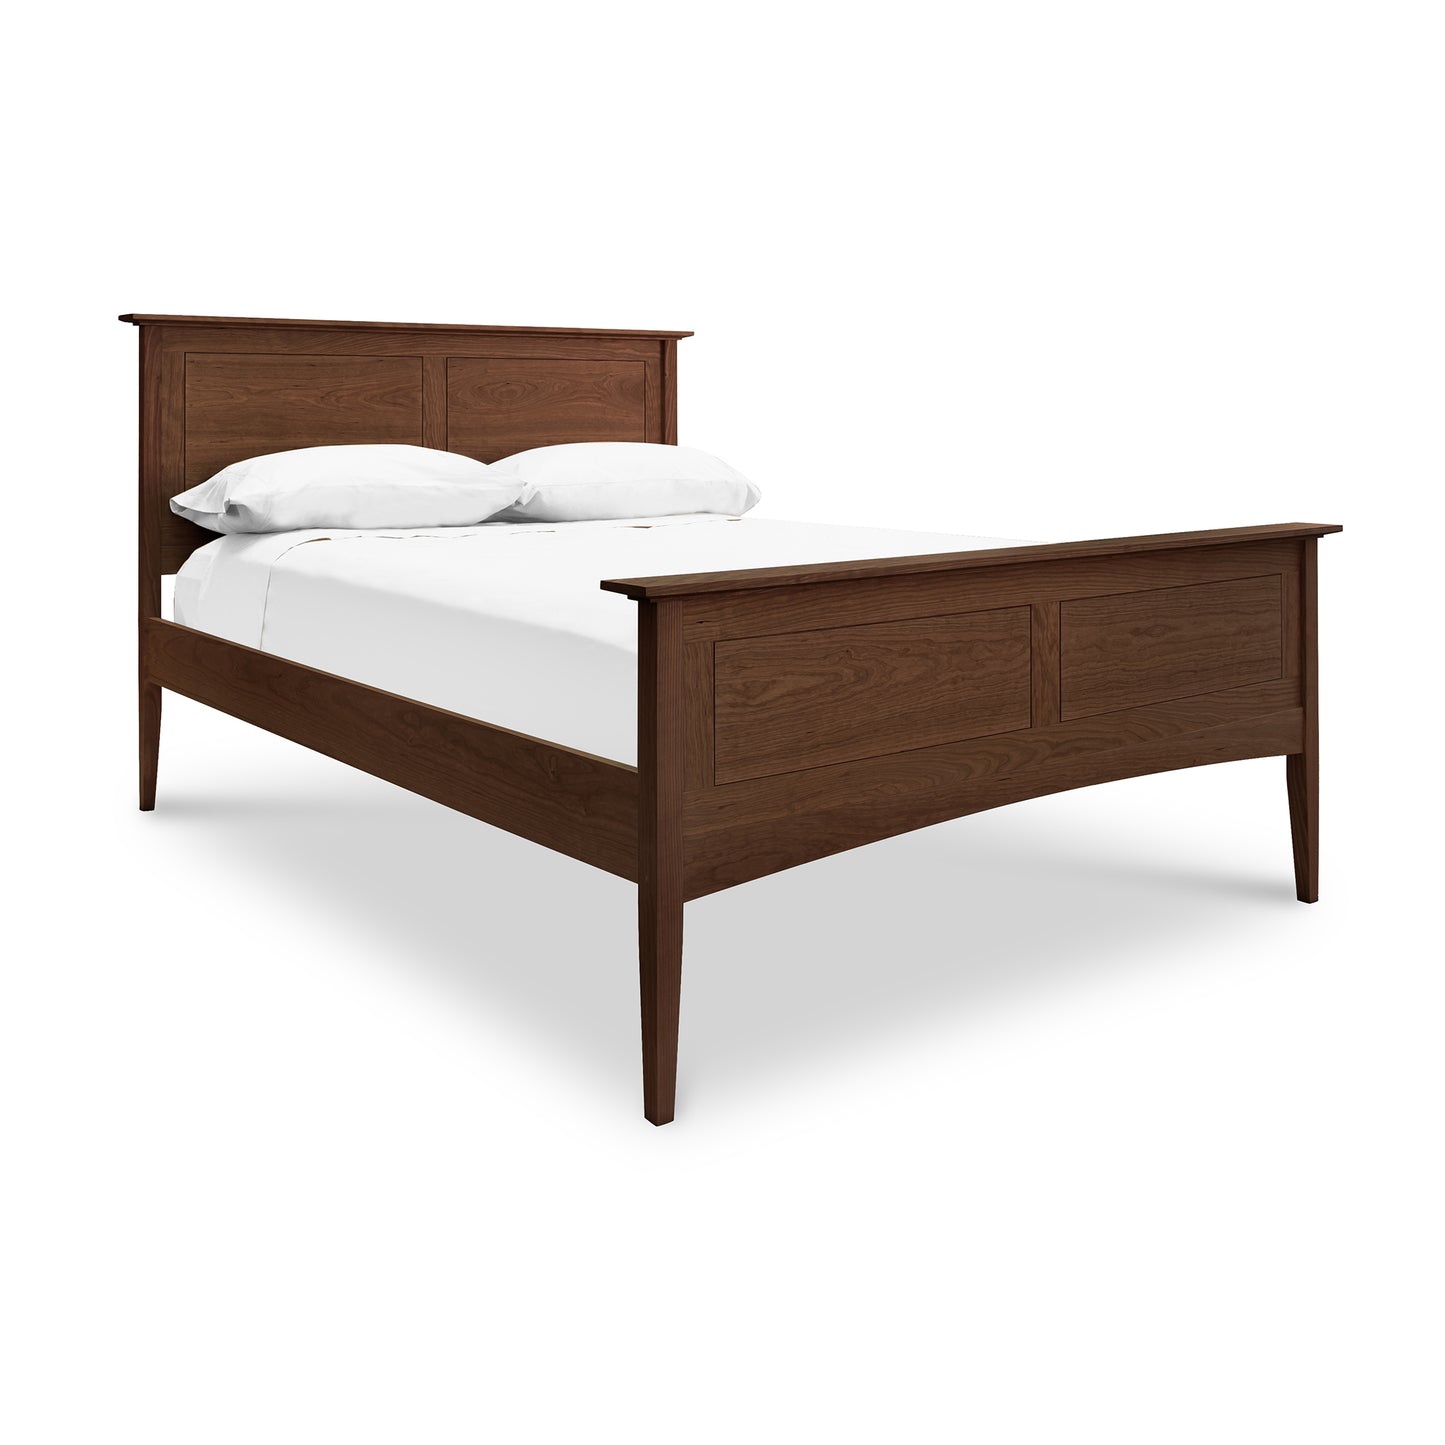 A Maple Corner Woodworks American Shaker Panel Bed with a prominent headboard and a matching footboard, both featuring shaker panel designs. The bed is dressed with plain white bedding.